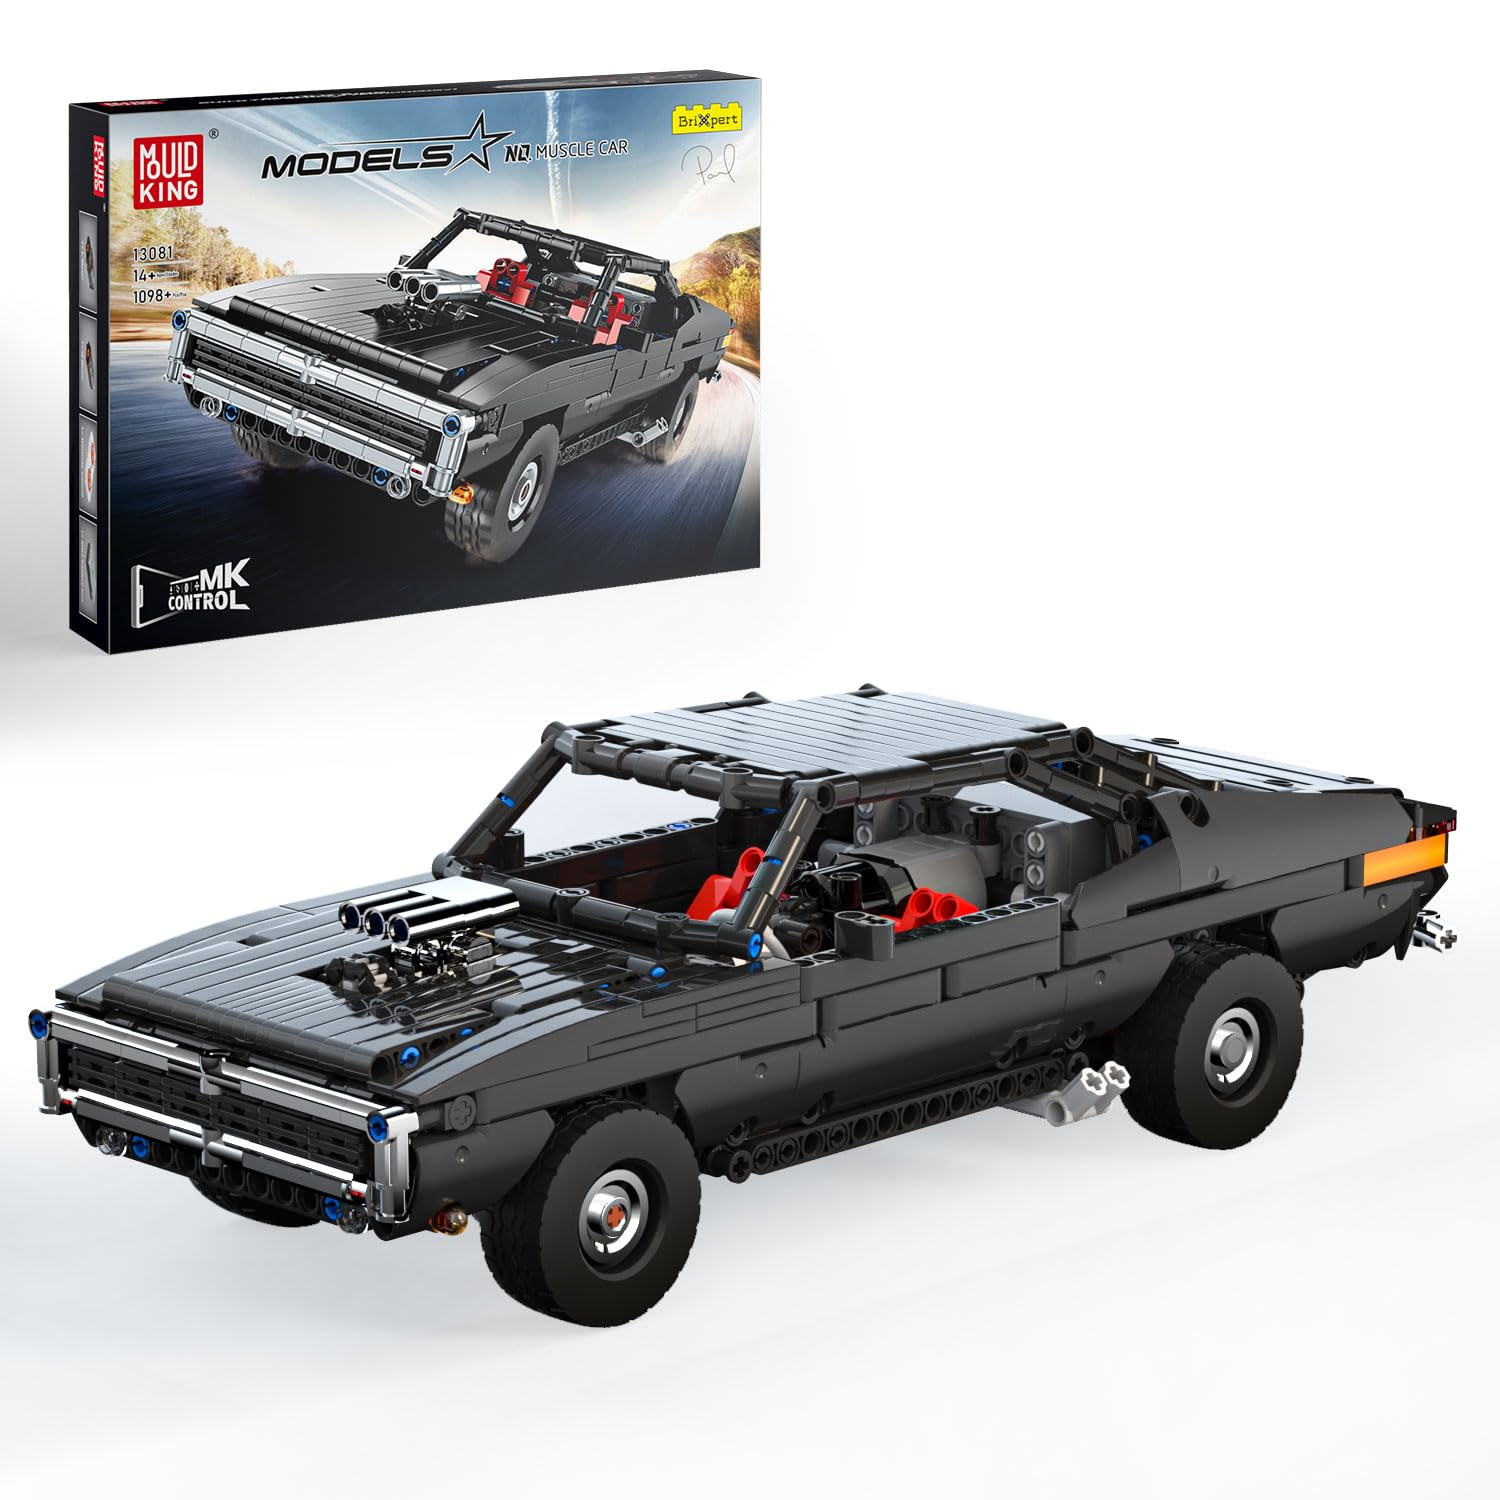 Mould King Technic Dodge Charger RT MOC Racing Car Building Sets Toy Building Blocks Sports Car Model 13081 Collectible Musc